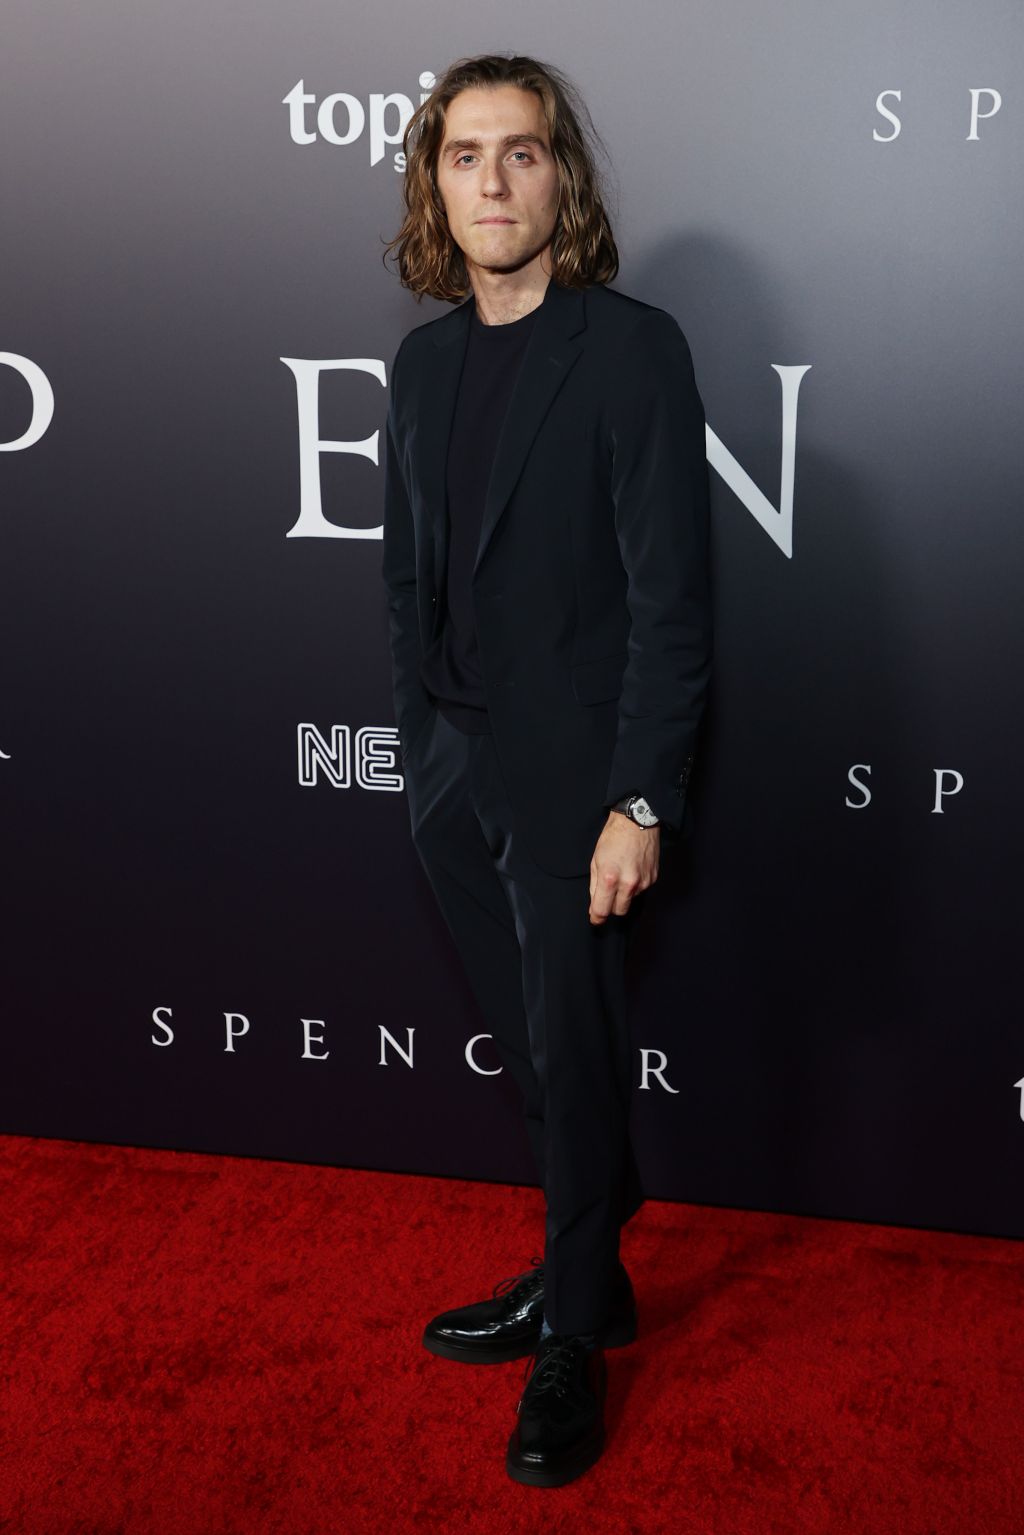 Photos: 'Spencer' stars walk the red carpet at Los Angeles premiere